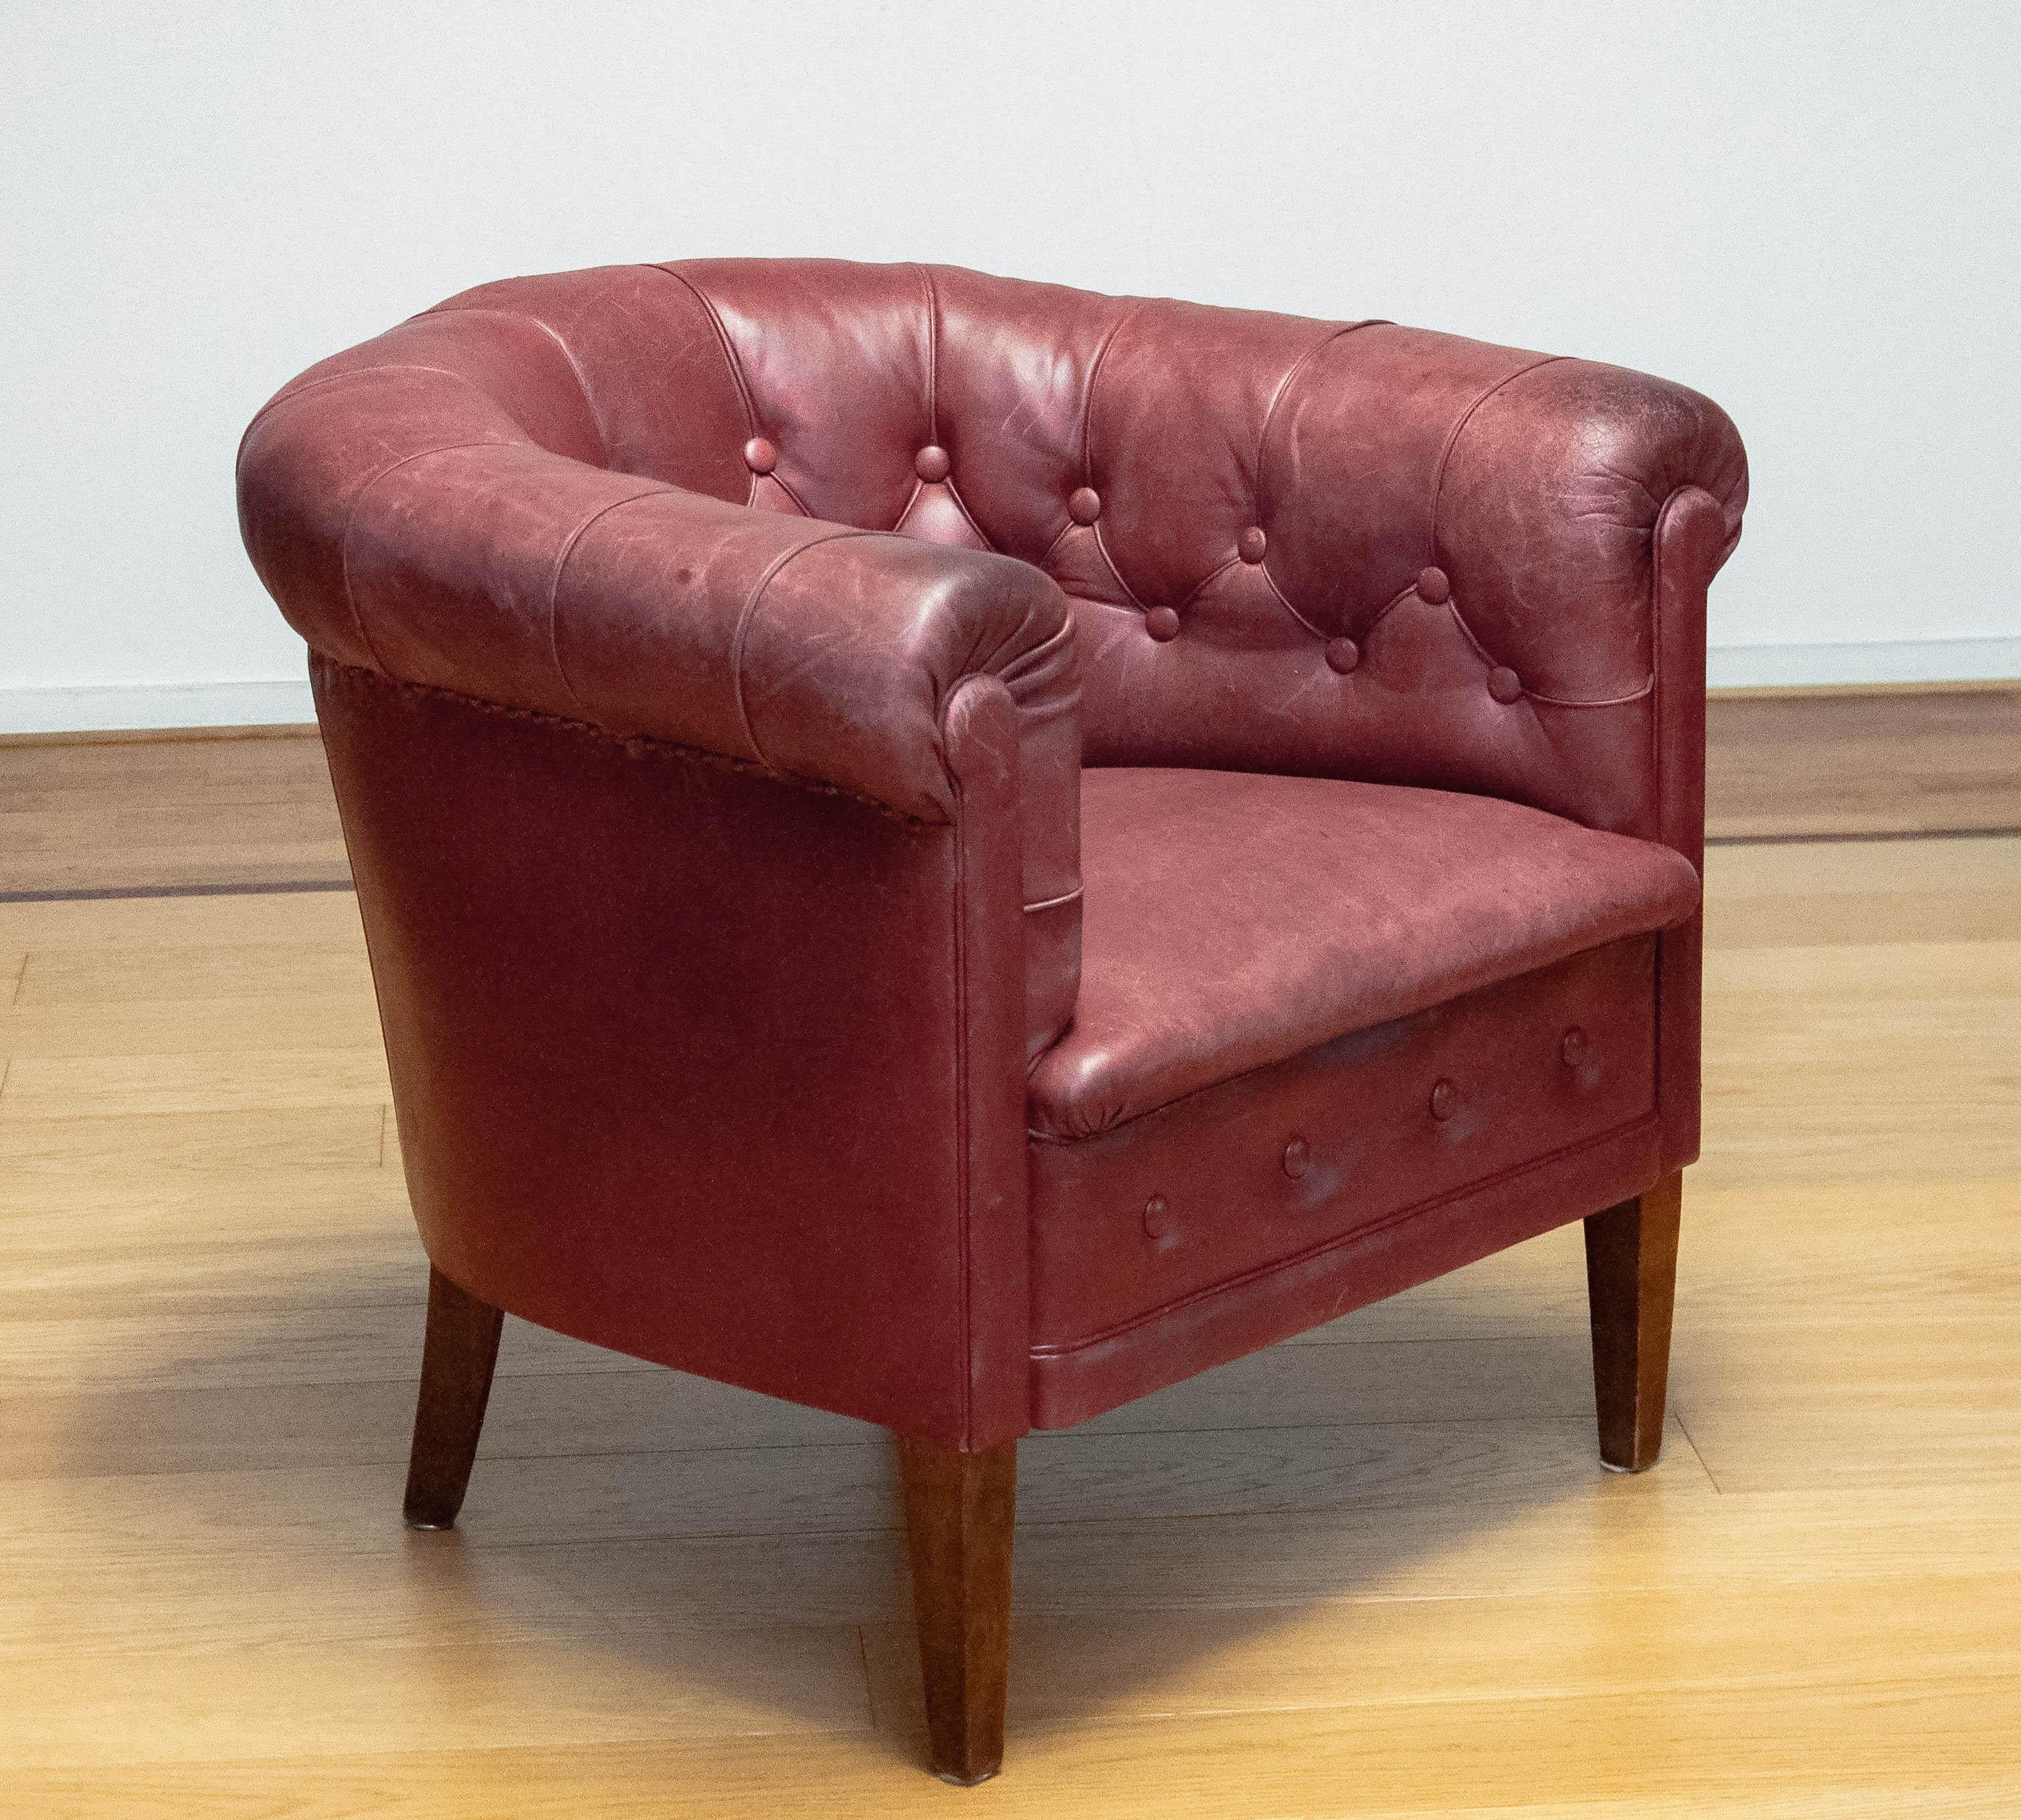 1930s Swedish Crimson Red Chesterfield Club / Lounge Chair in Patinated Leather For Sale 3